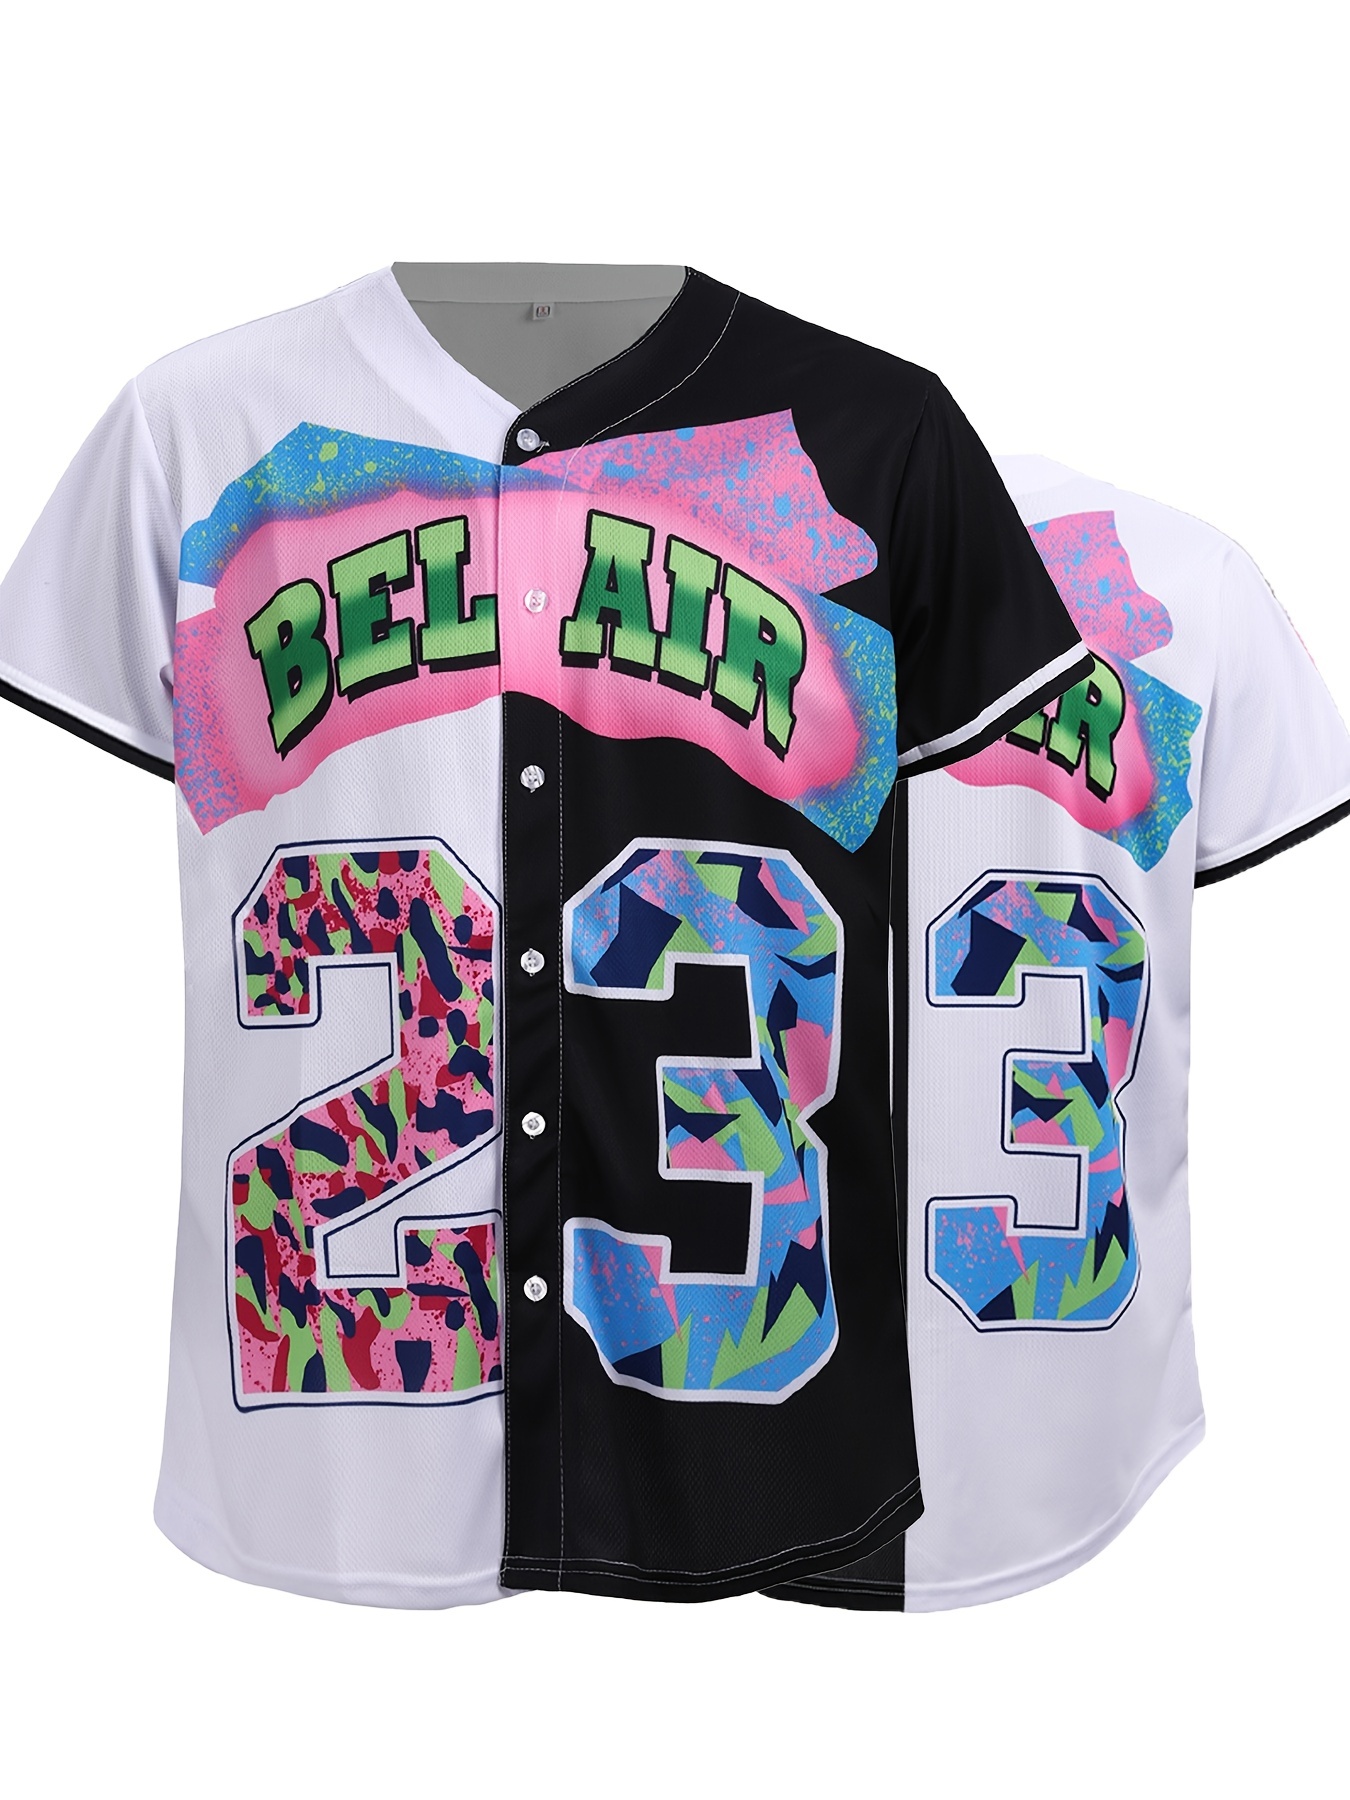 90s Outfit for Men Bel Air 88 Baseball Jersey for Man 90s Urban Theme Party Hip Hop Fashion Blouses for Club and Pub